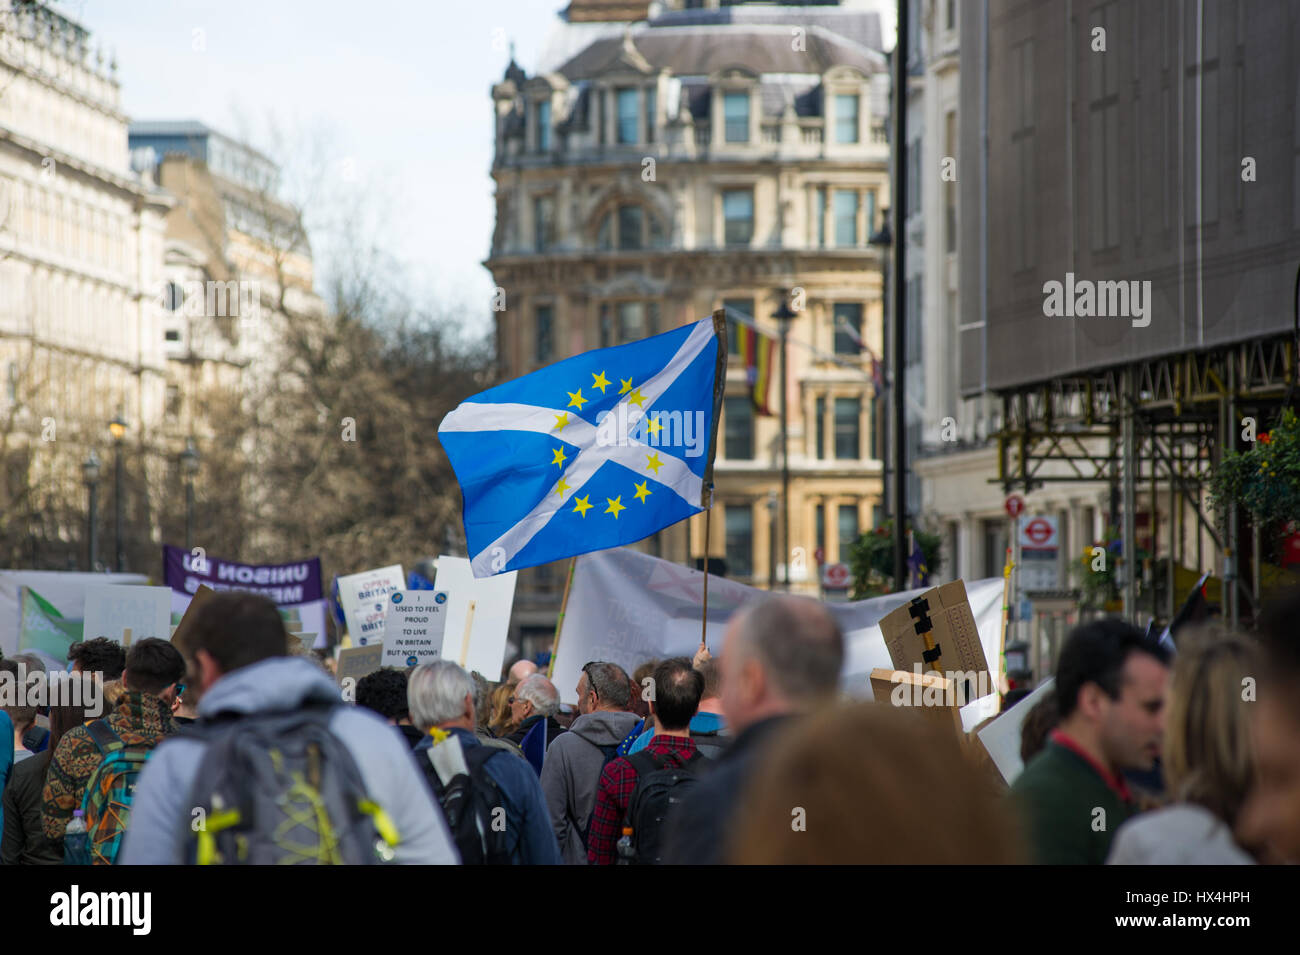 London, England, UK.  25th March 2017.Supporters of the EU marched through London and gathered at Westminster to protest against Brexit. Andrew Steven Graham/Alamy Live News Stock Photo